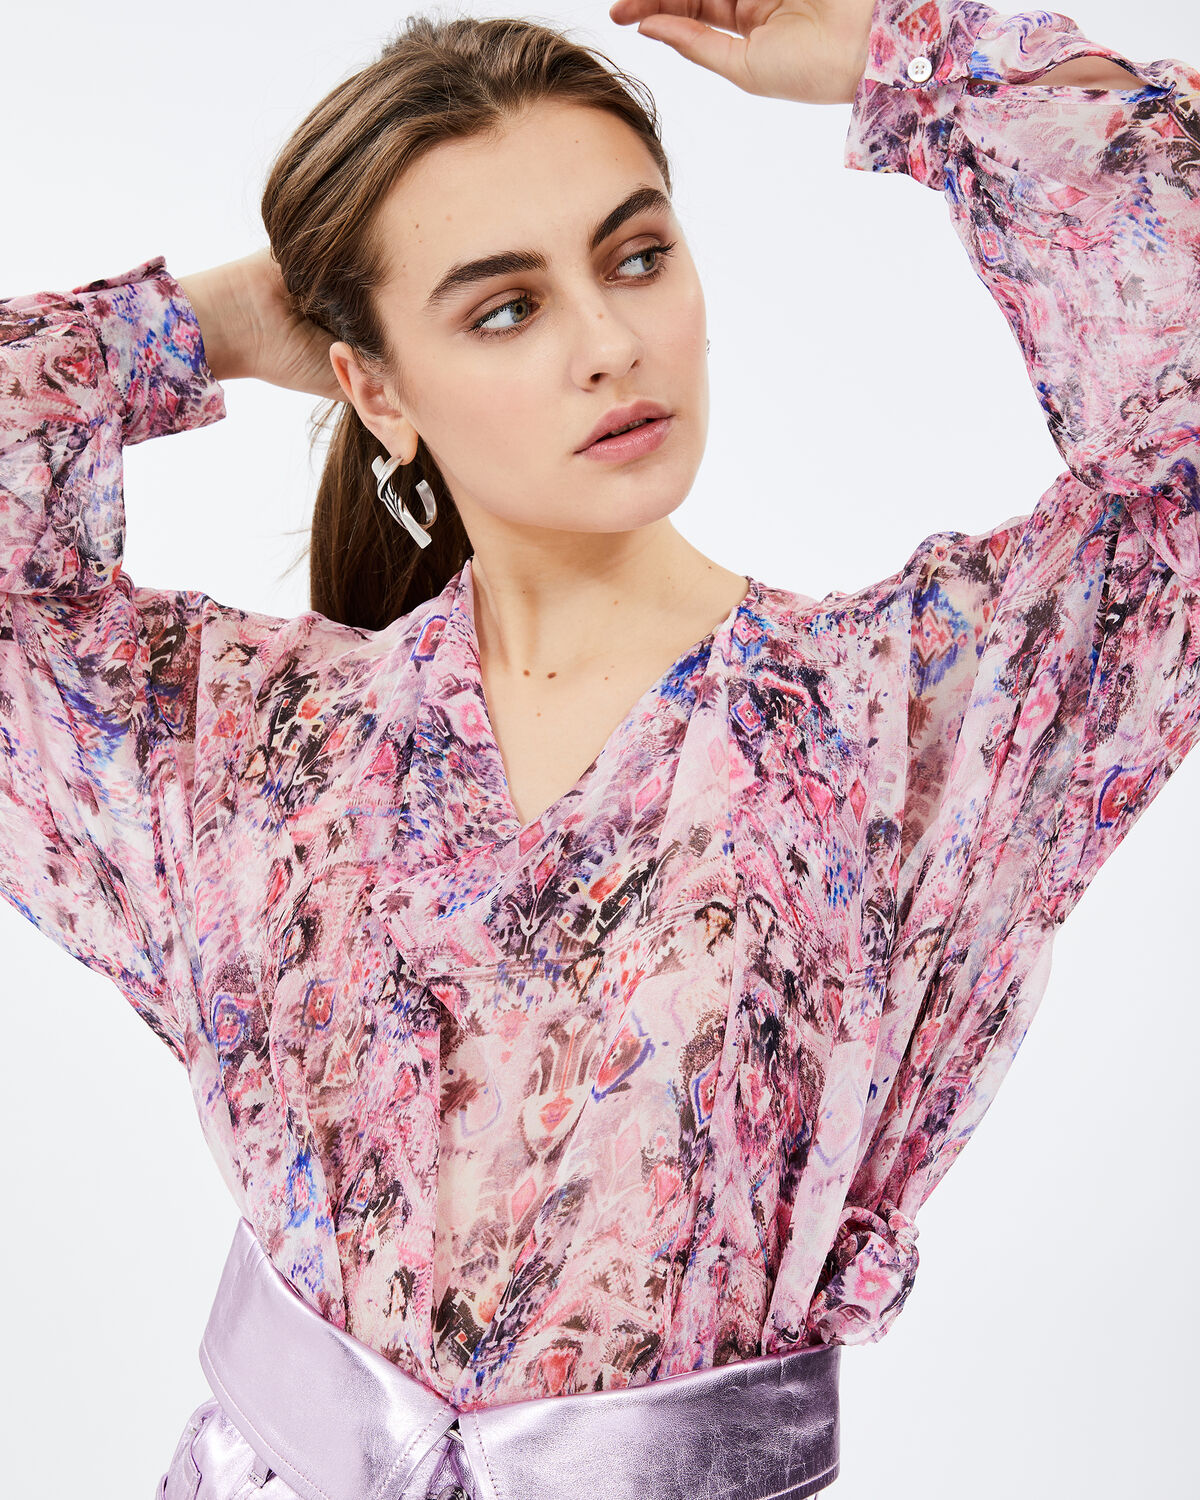 Ipomea Top Pink by IRO Paris